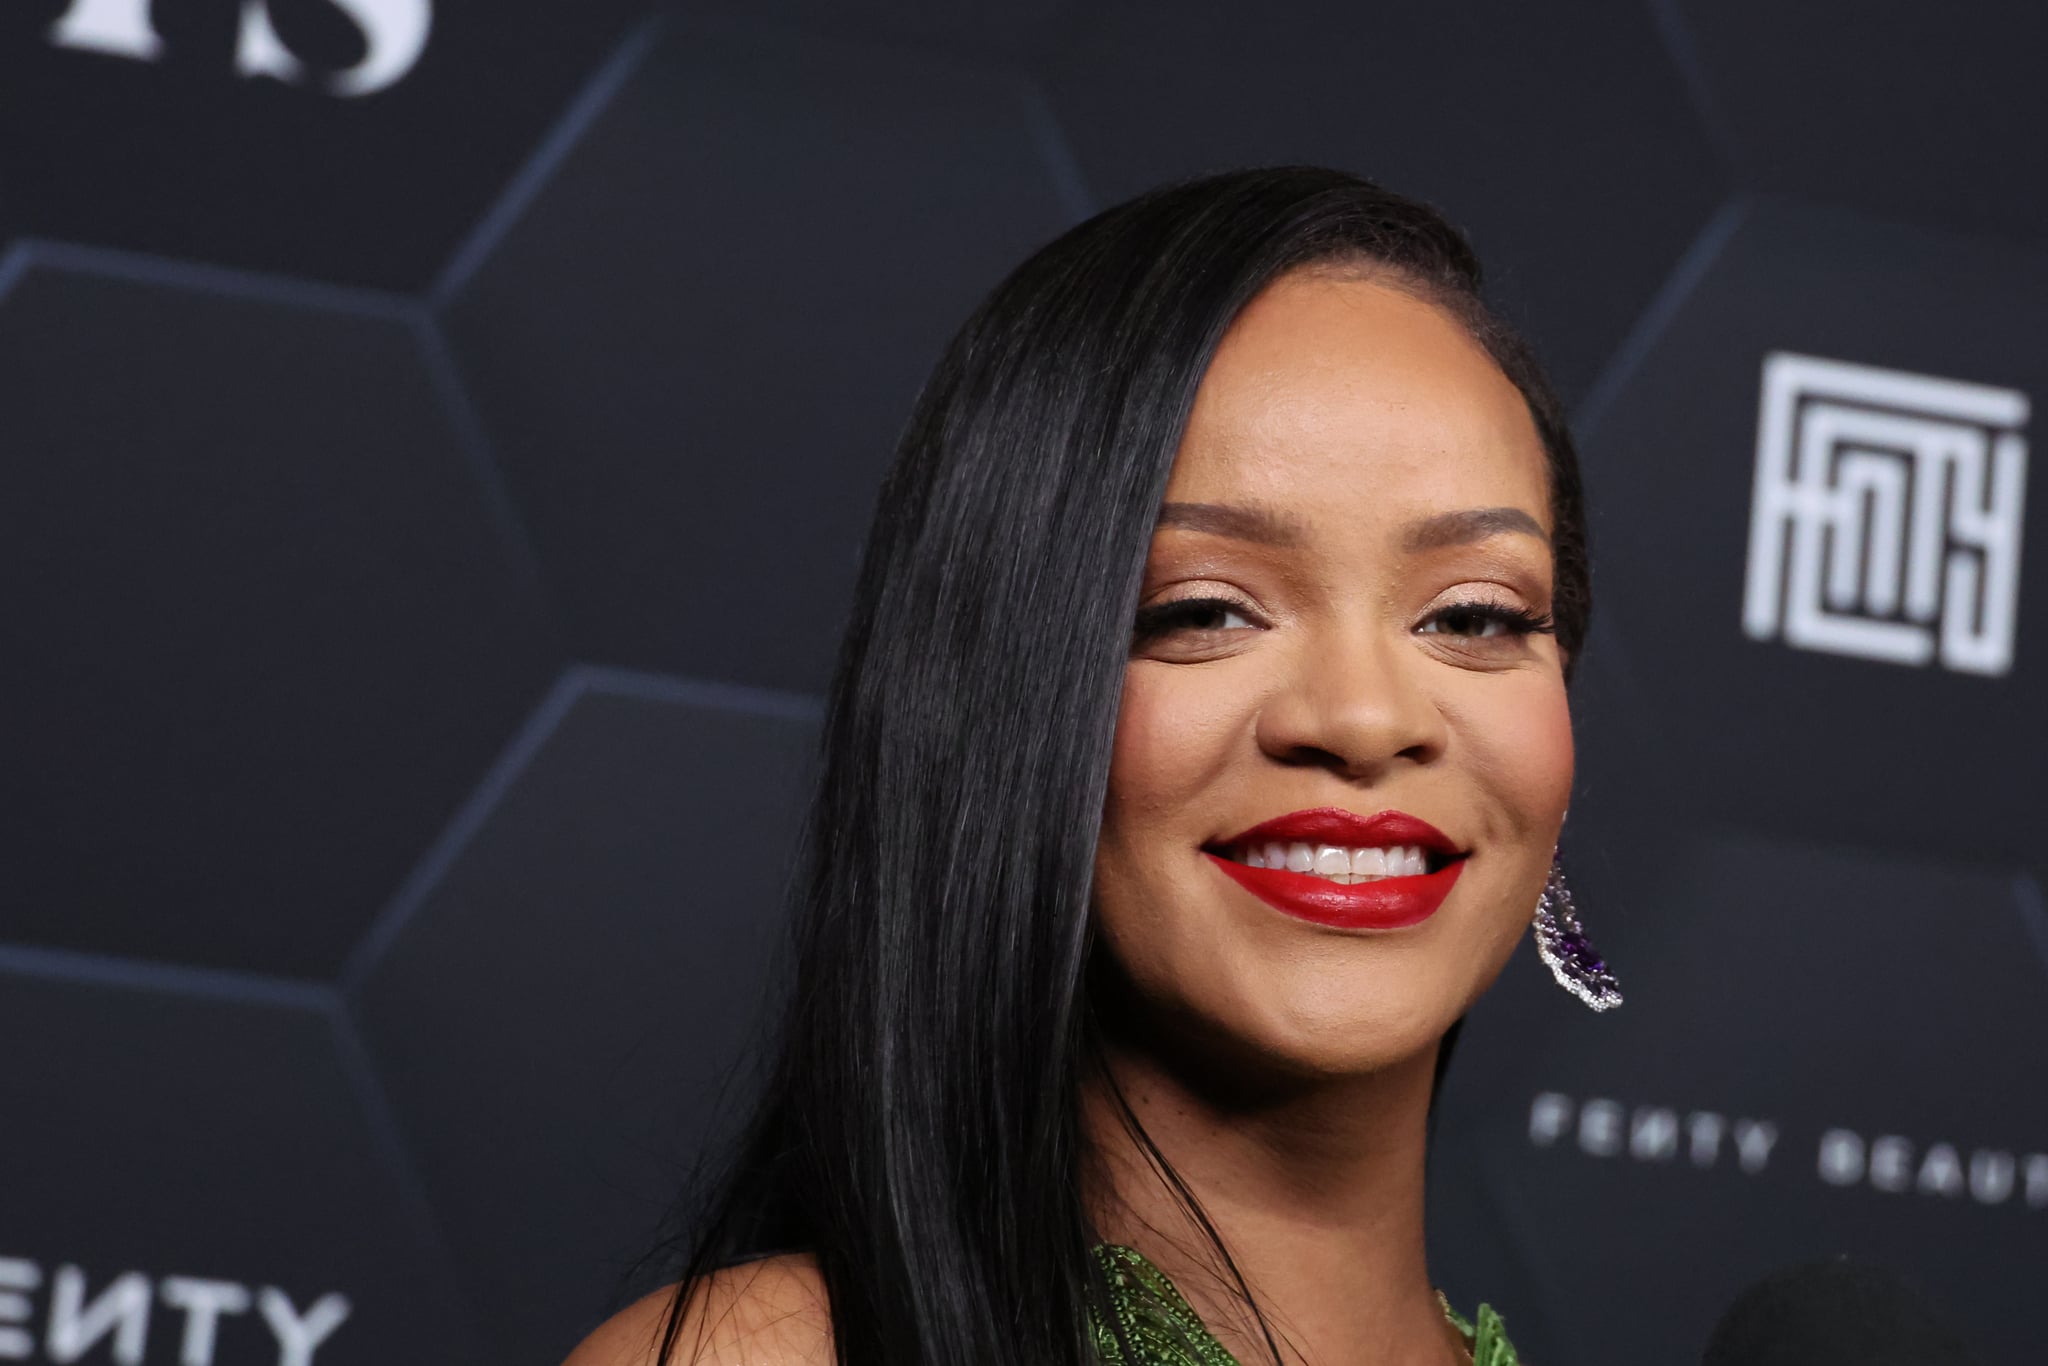 LOS ANGELES, CALIFORNIA - FEBRUARY 11: Rihanna poses for a picture as she celebrates her beauty brands fenty beauty and fenty skin at Goya Studios on February 11, 2022 in Los Angeles, California. (Photo by Mike Coppola/Getty Images)